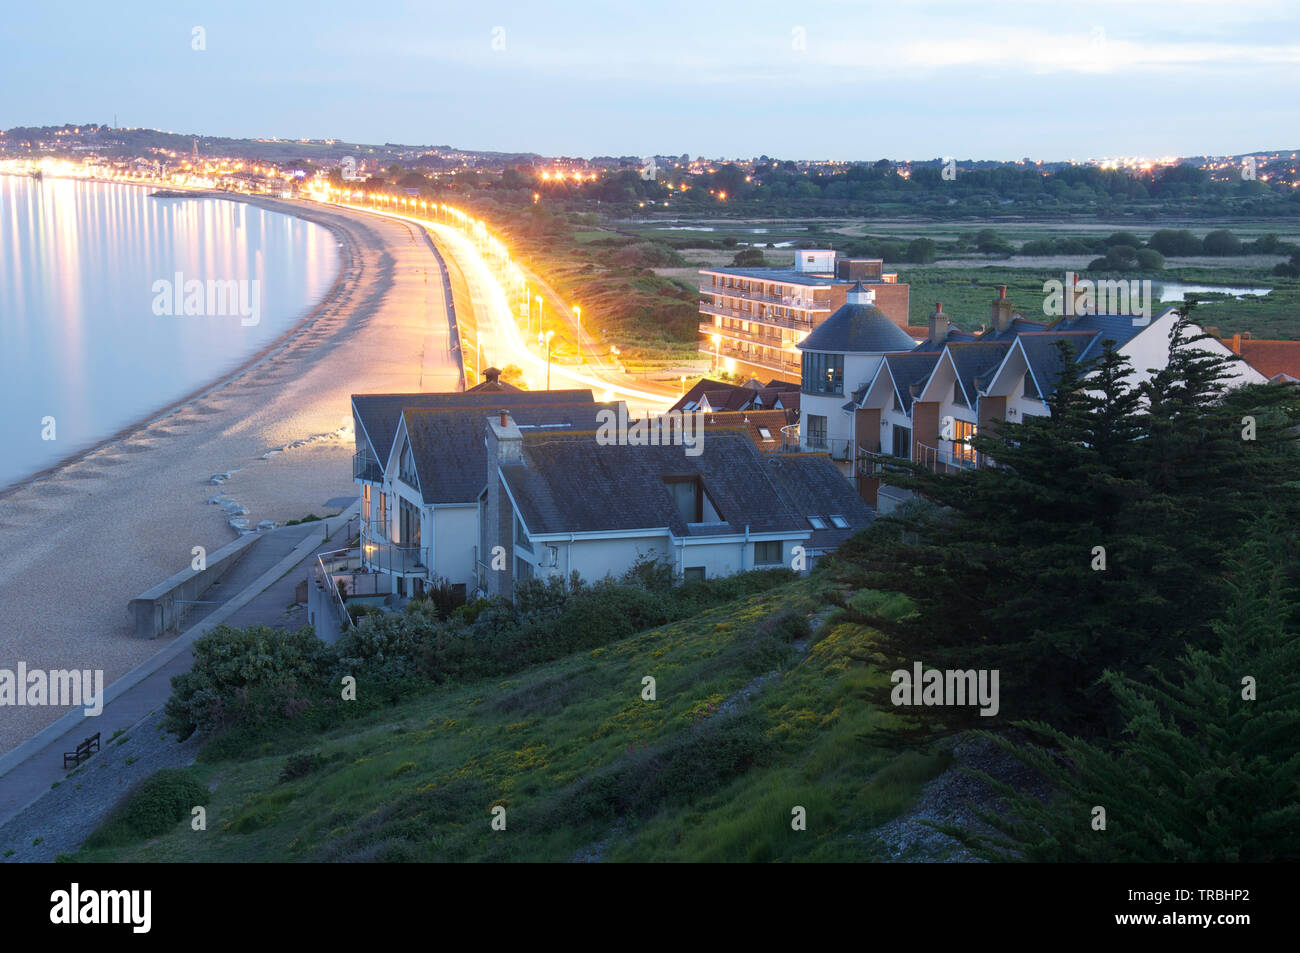 View overlooking the Dorset seaside resort of Weymouth. At dusk with street lights and car headlamps lighting up the shingle beach. South-west England. Stock Photo